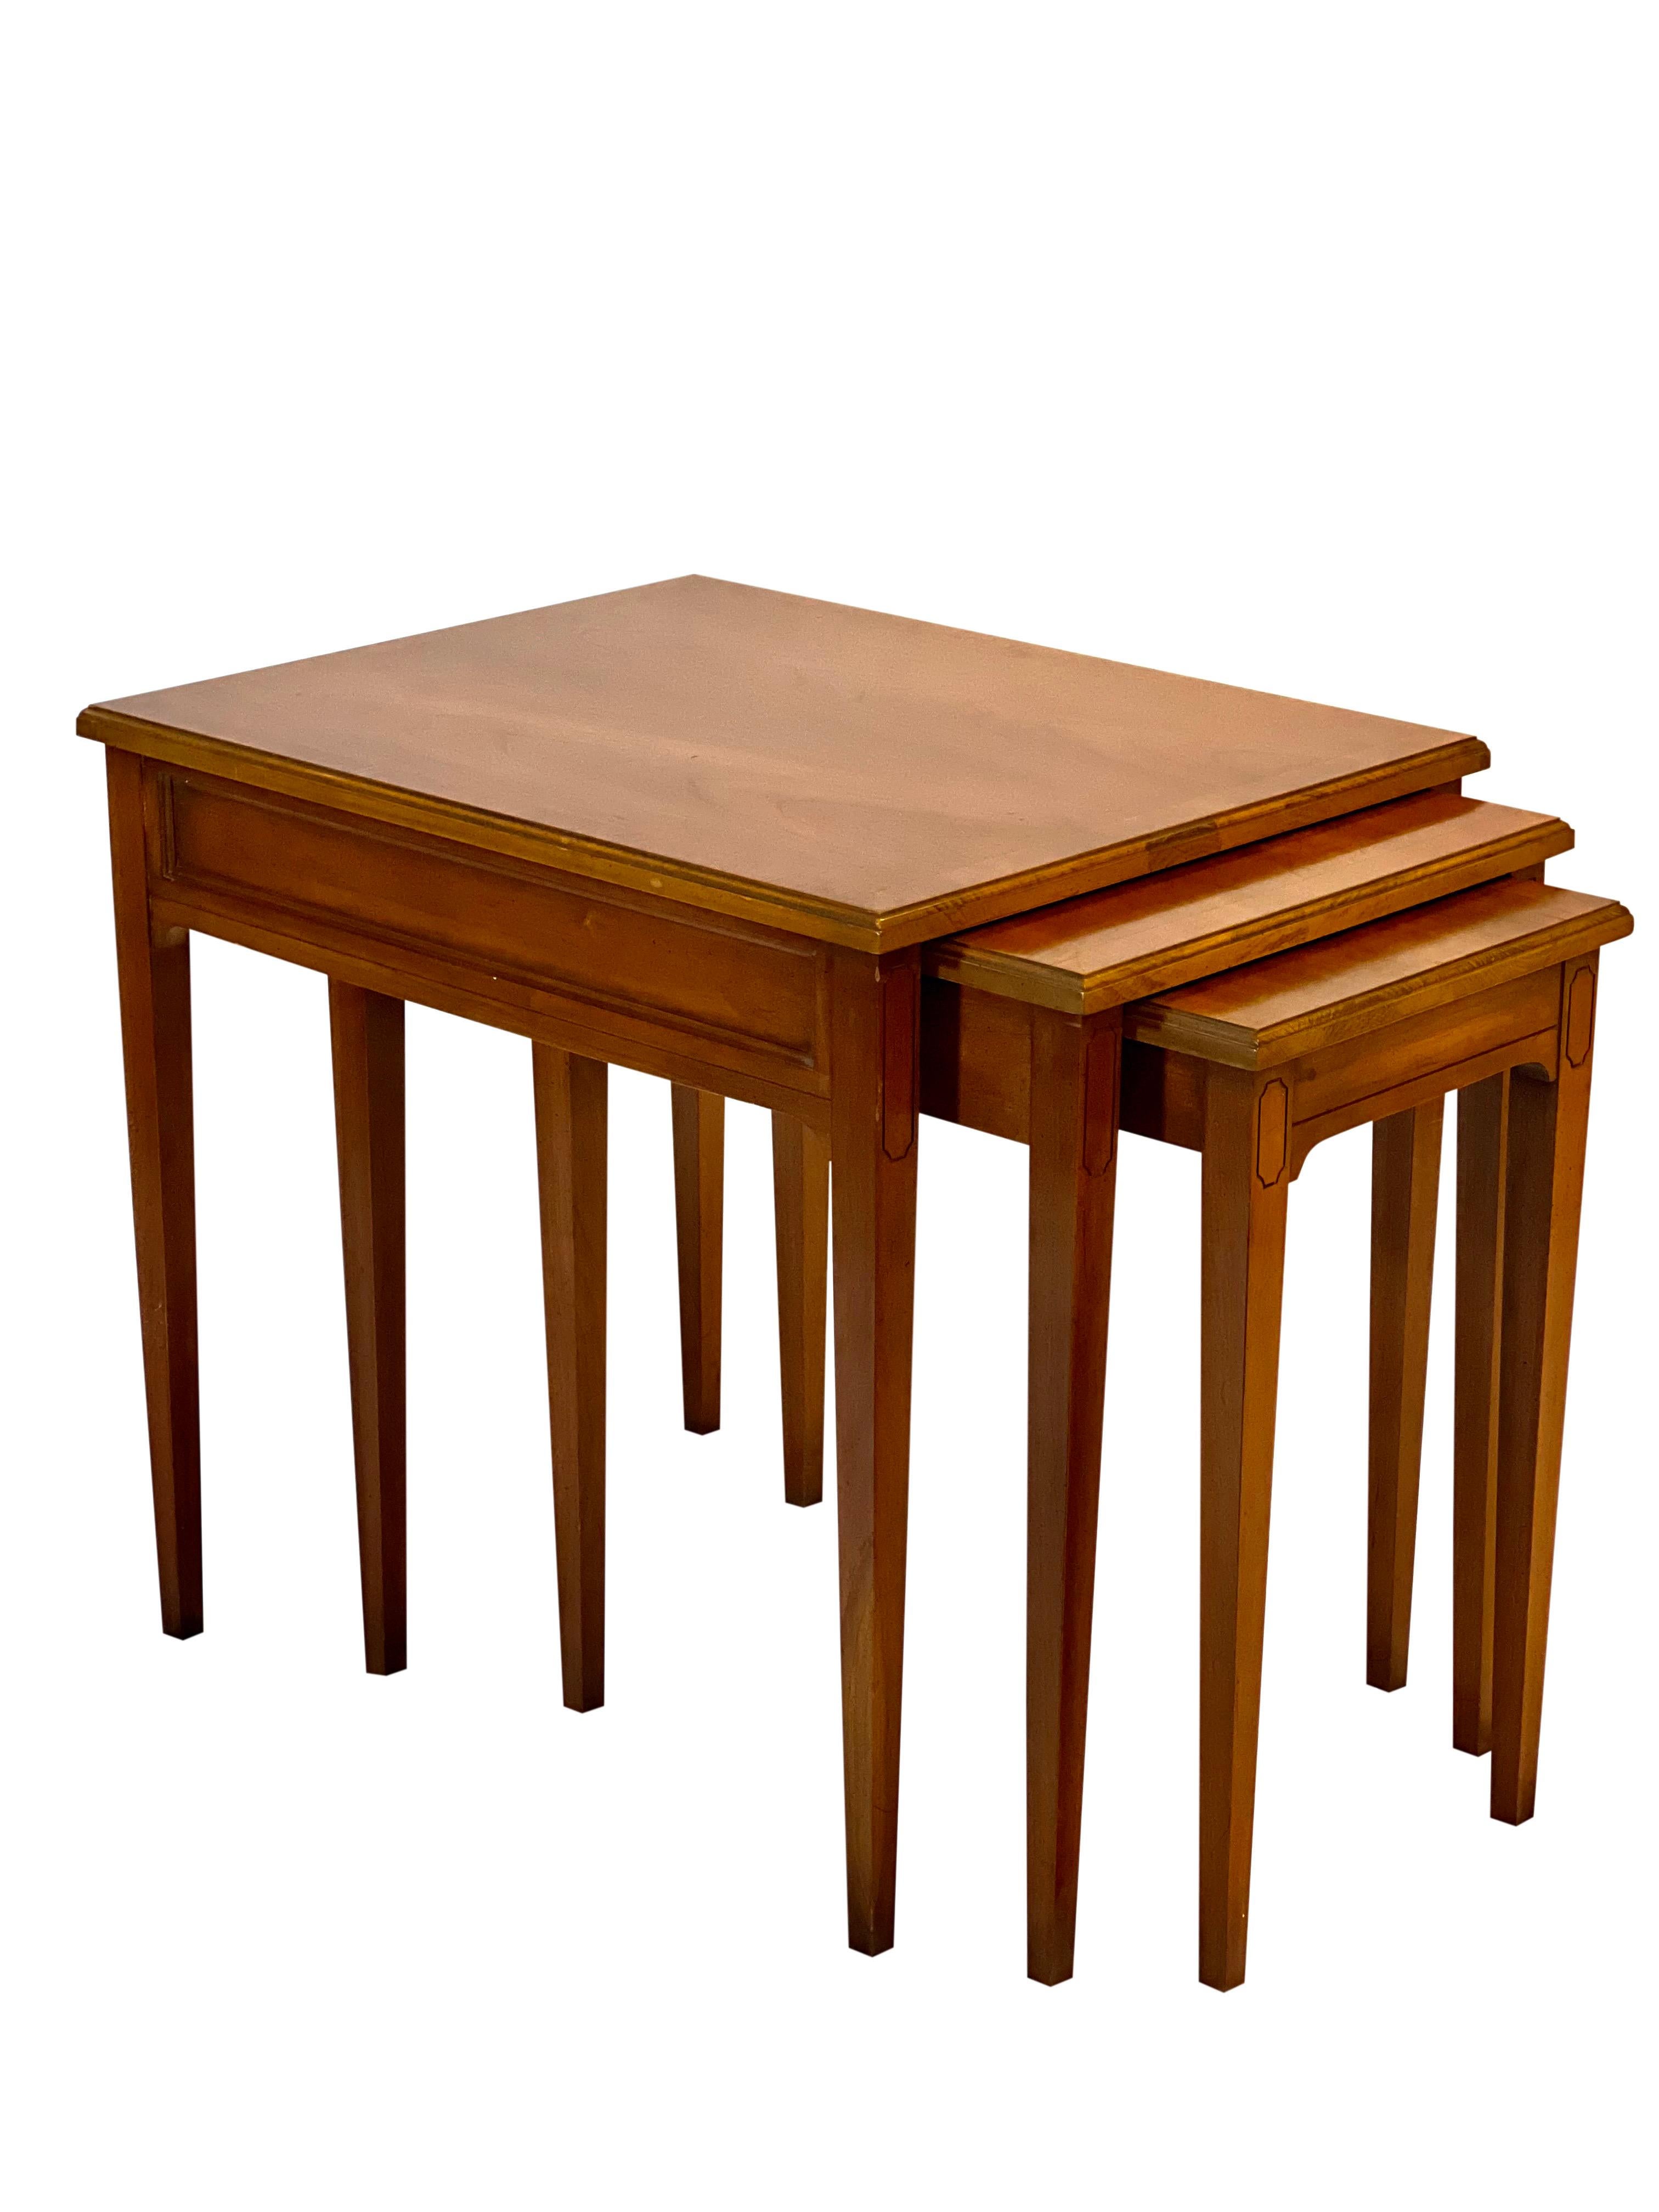 Midcentury fruitwood nesting tables by Heritage, set of 3.

Beautifully crafted tables in near mint condition. The set meticulously fits together with built-in sliding rails which not only protect but also keep the tables perfectly aligned. They